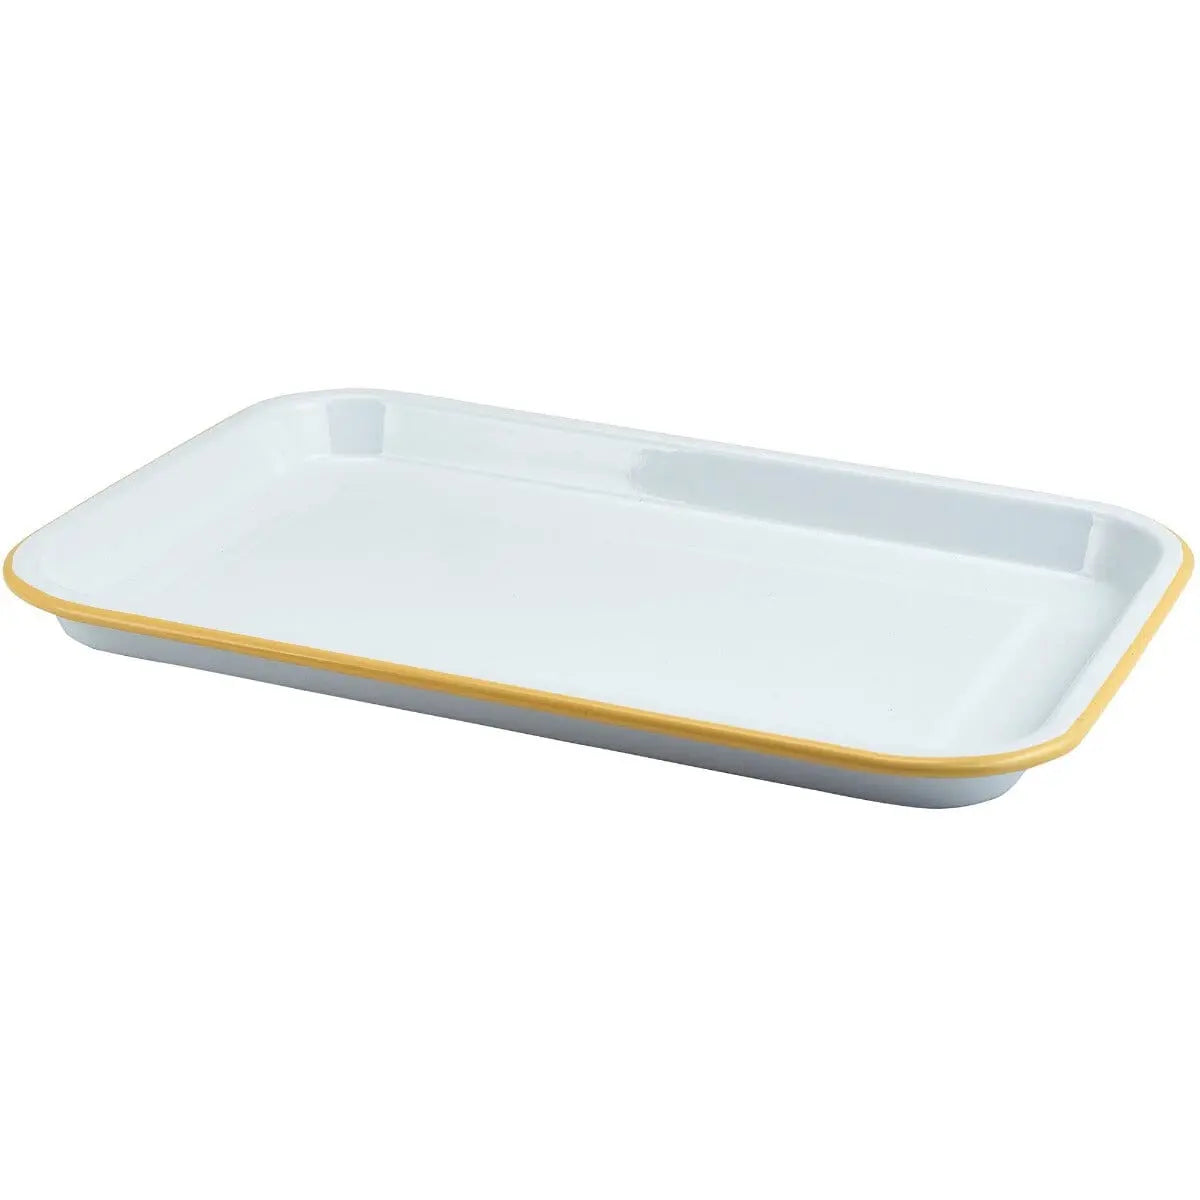 Personalised Grilled Enamel Serving Tray Enamel - White with Yellow Rim  